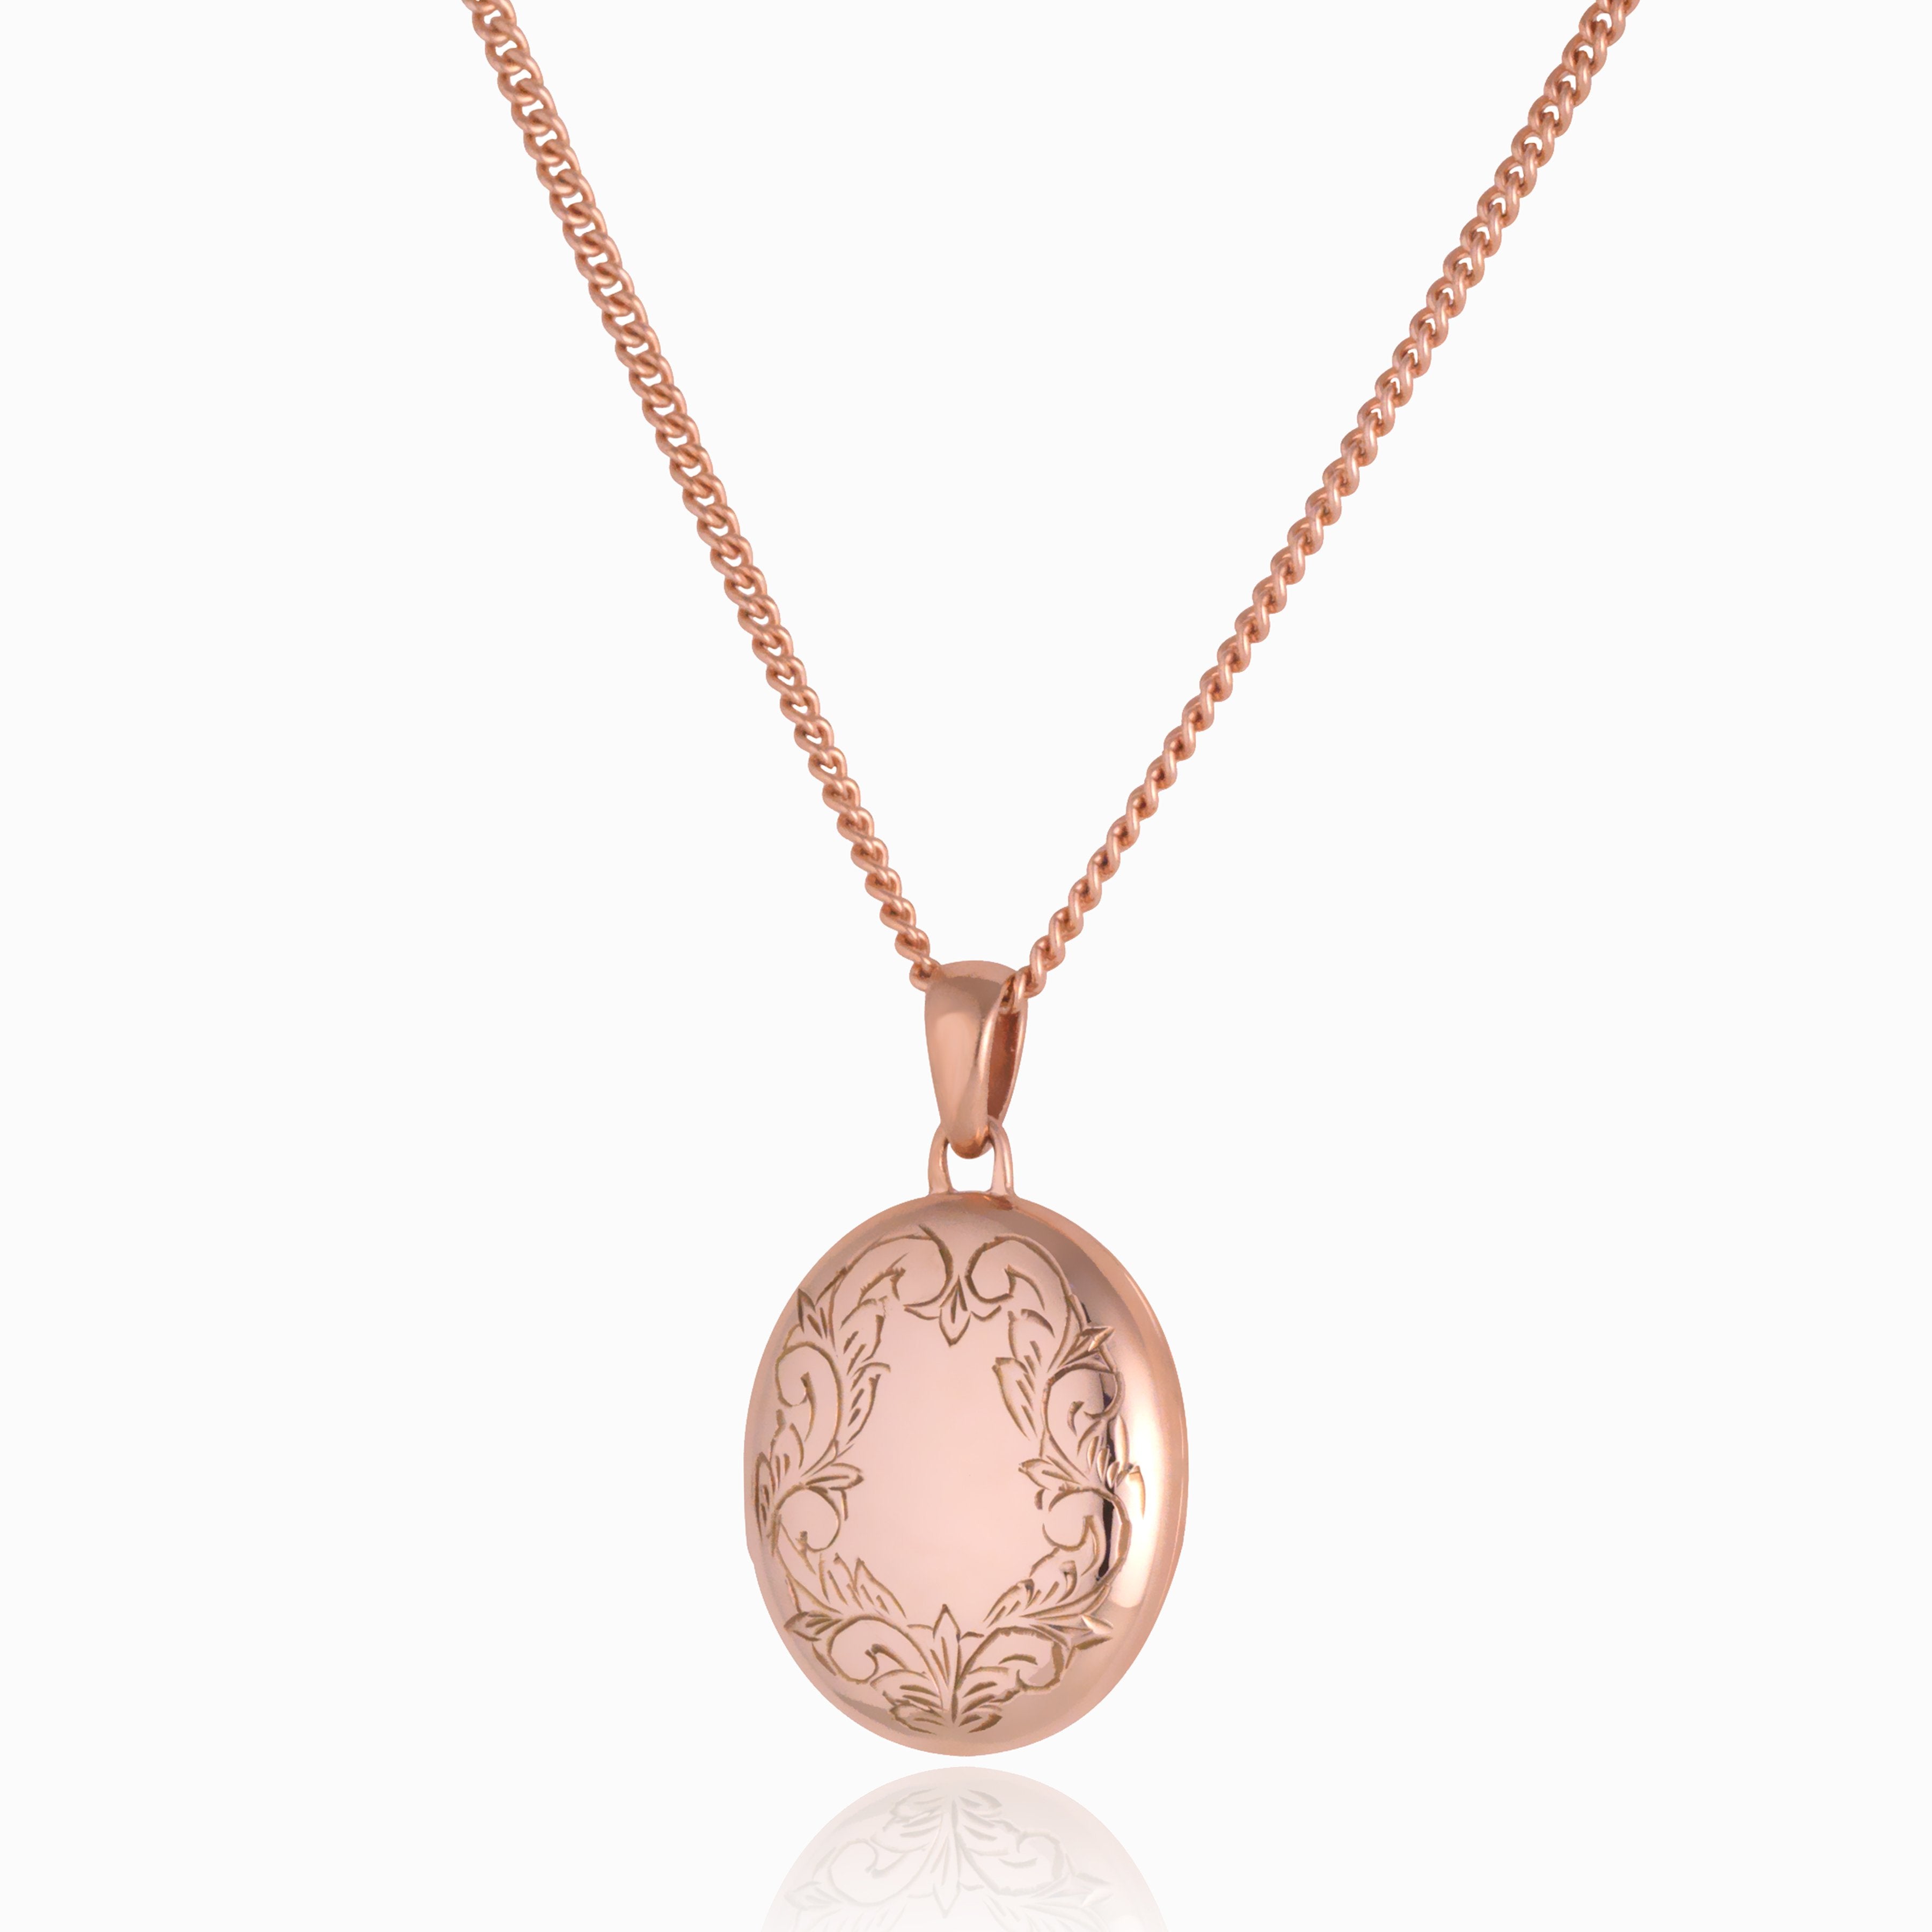 Front shot of a premium 9 ct rose gold foliate border locket set on matching 9 ct rose gold curb chain.